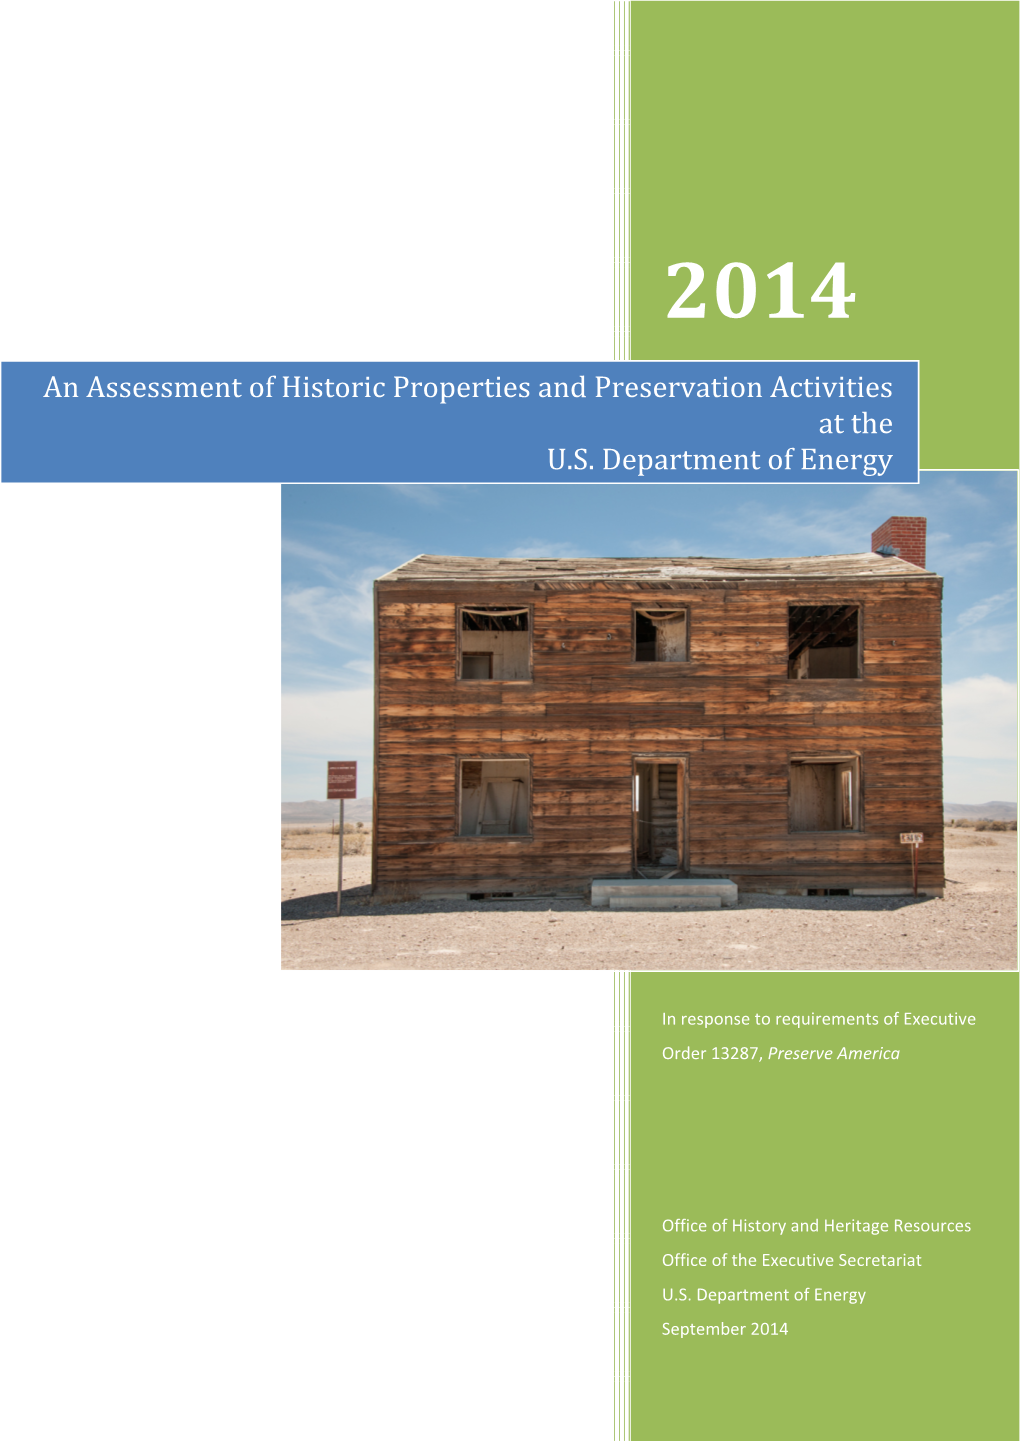 An Assessment of Historic Properties and Preservation Activities at the U.S